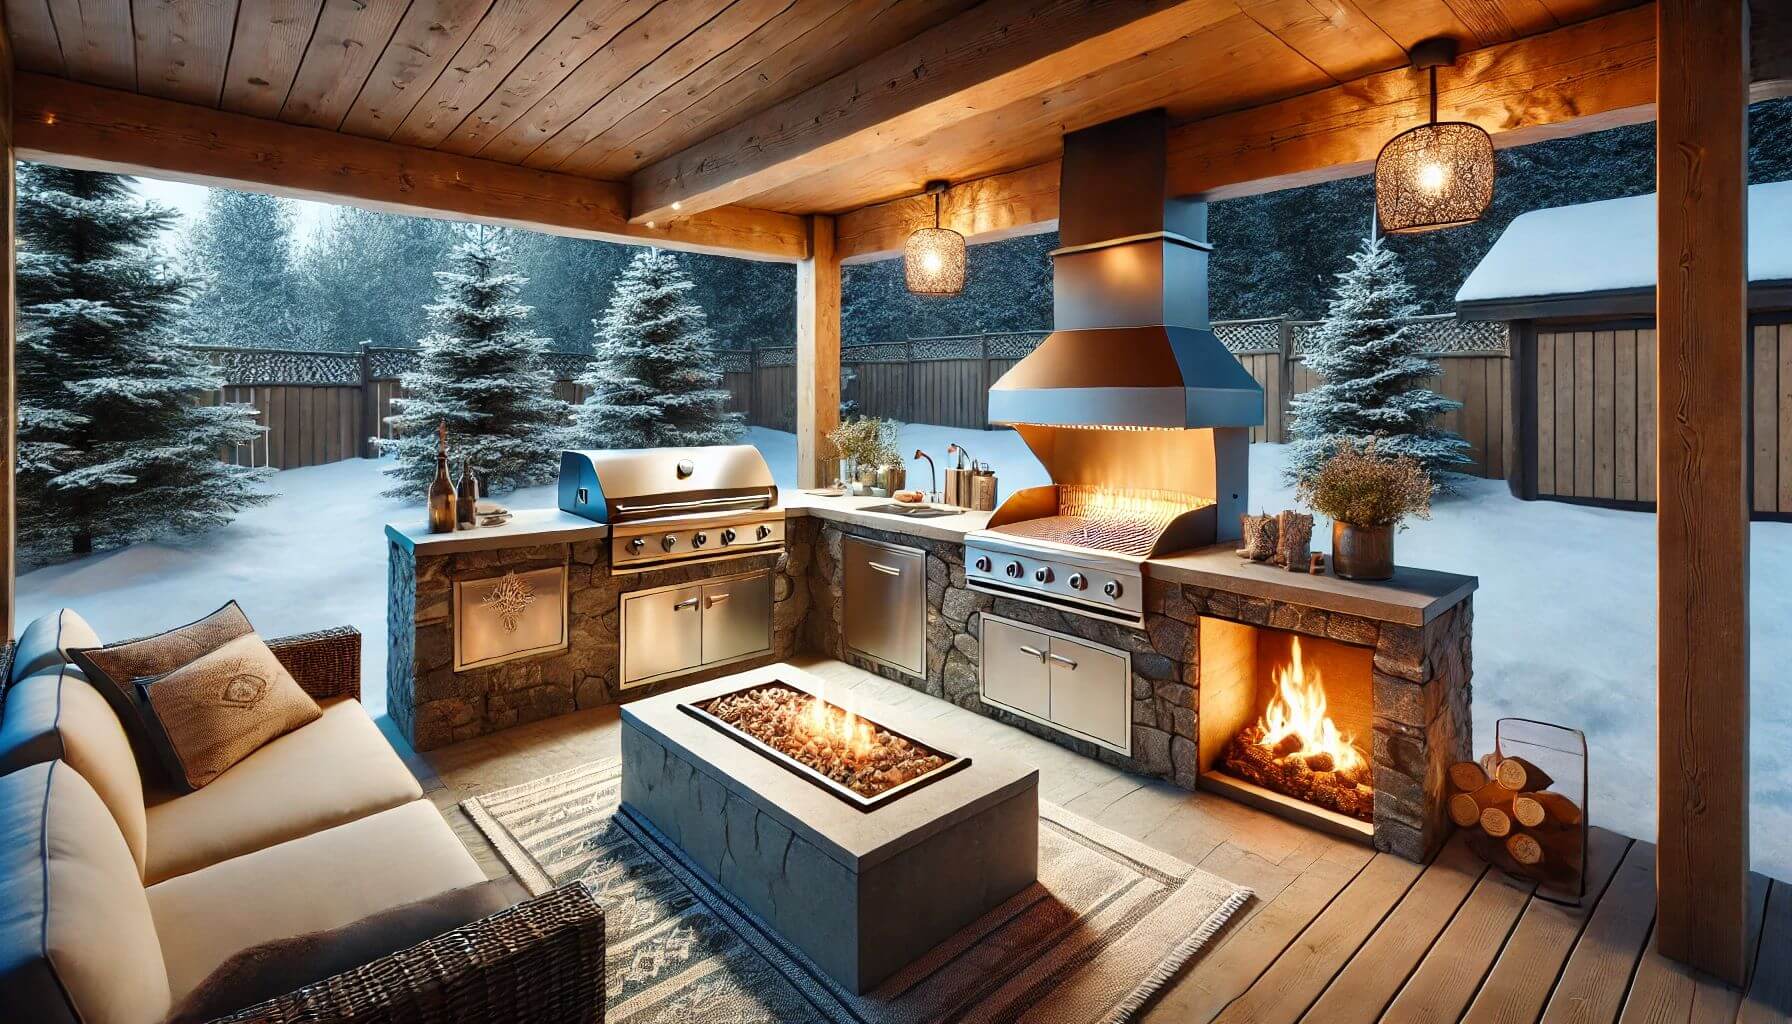 Outdoor kitchen designs for Winter: What you should know